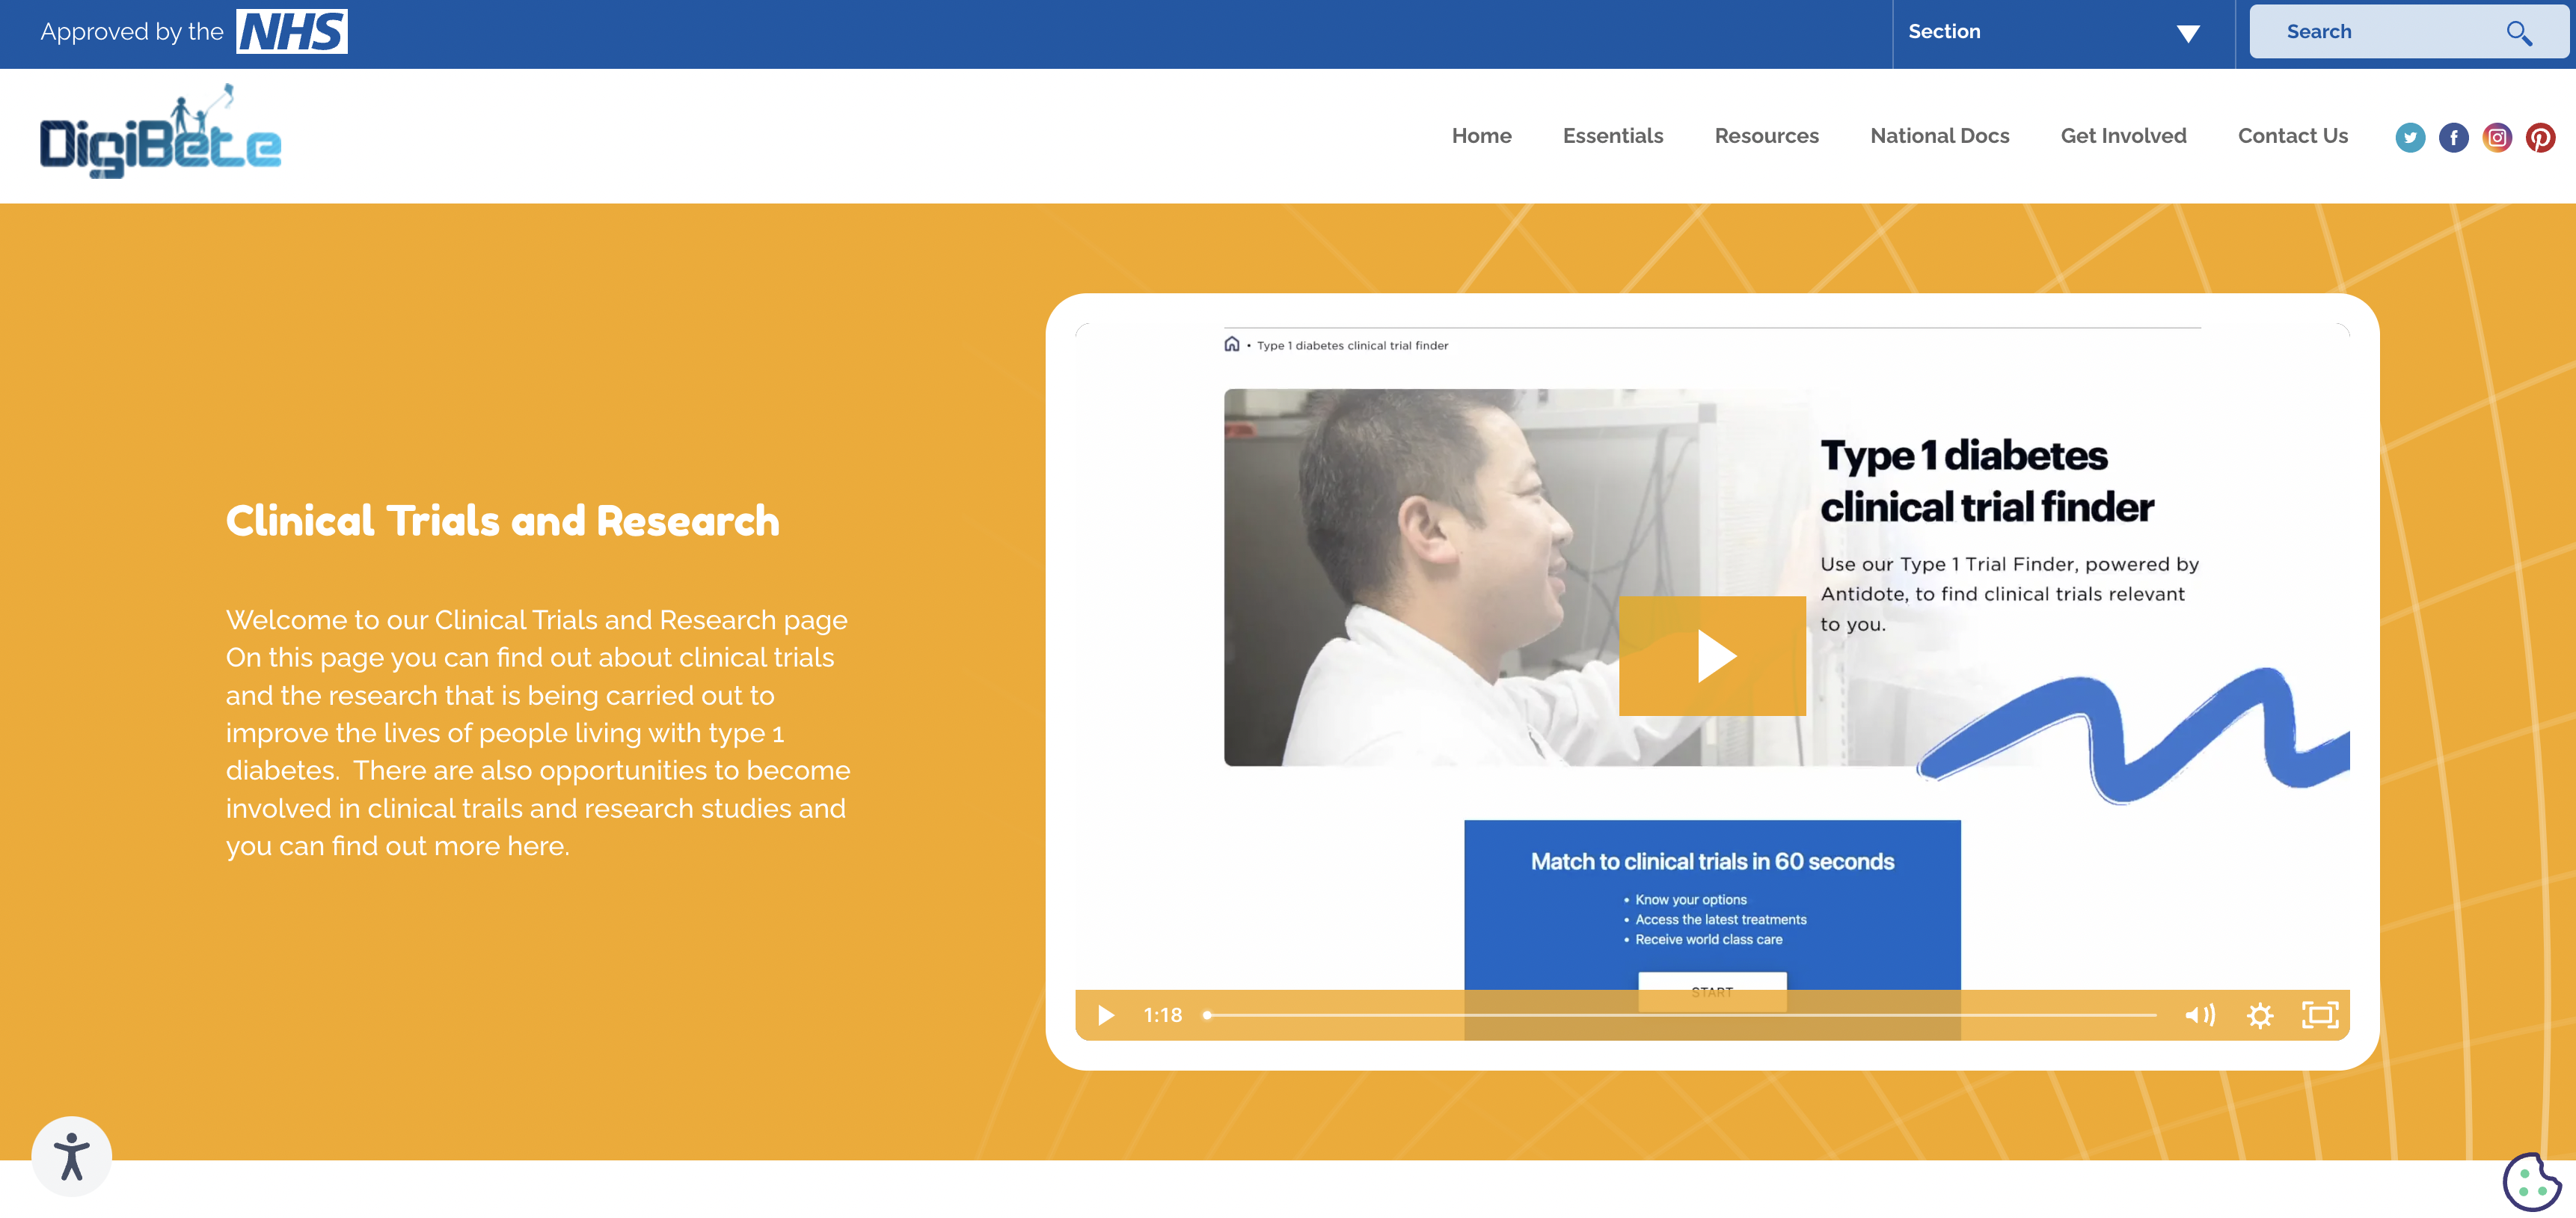 Clinical Trials Finder Launches on DigiBete